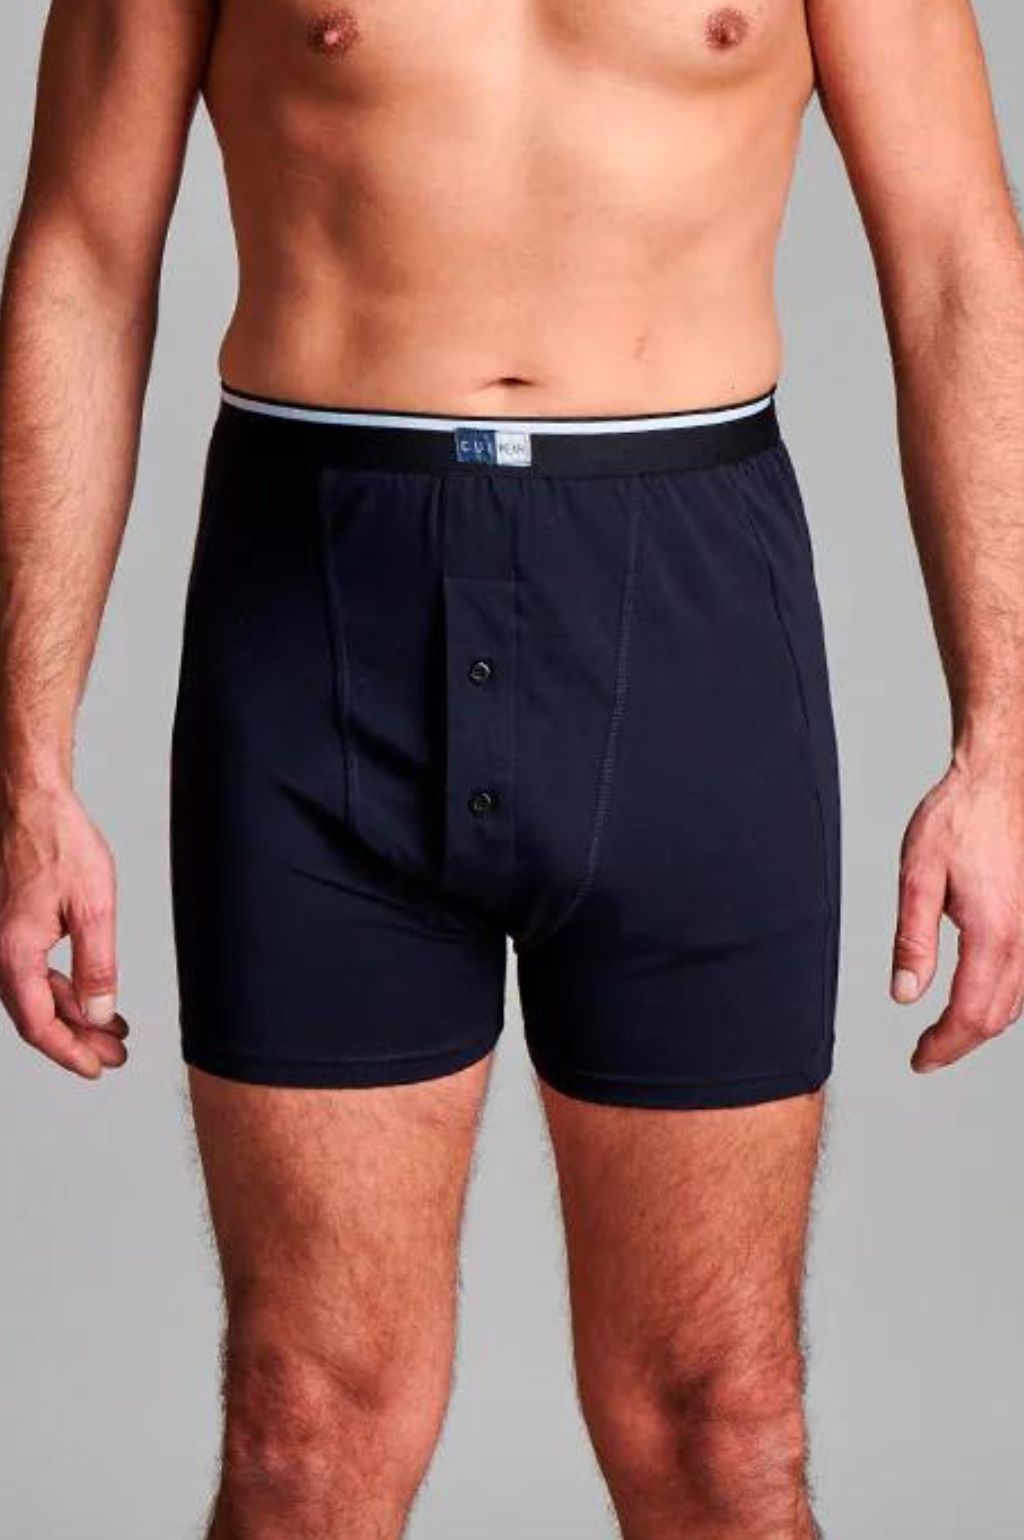 CUI Mens Ostomy High Waist Cotton Fitted Trunk - 1 each, LARGE, NAVY - TWIN